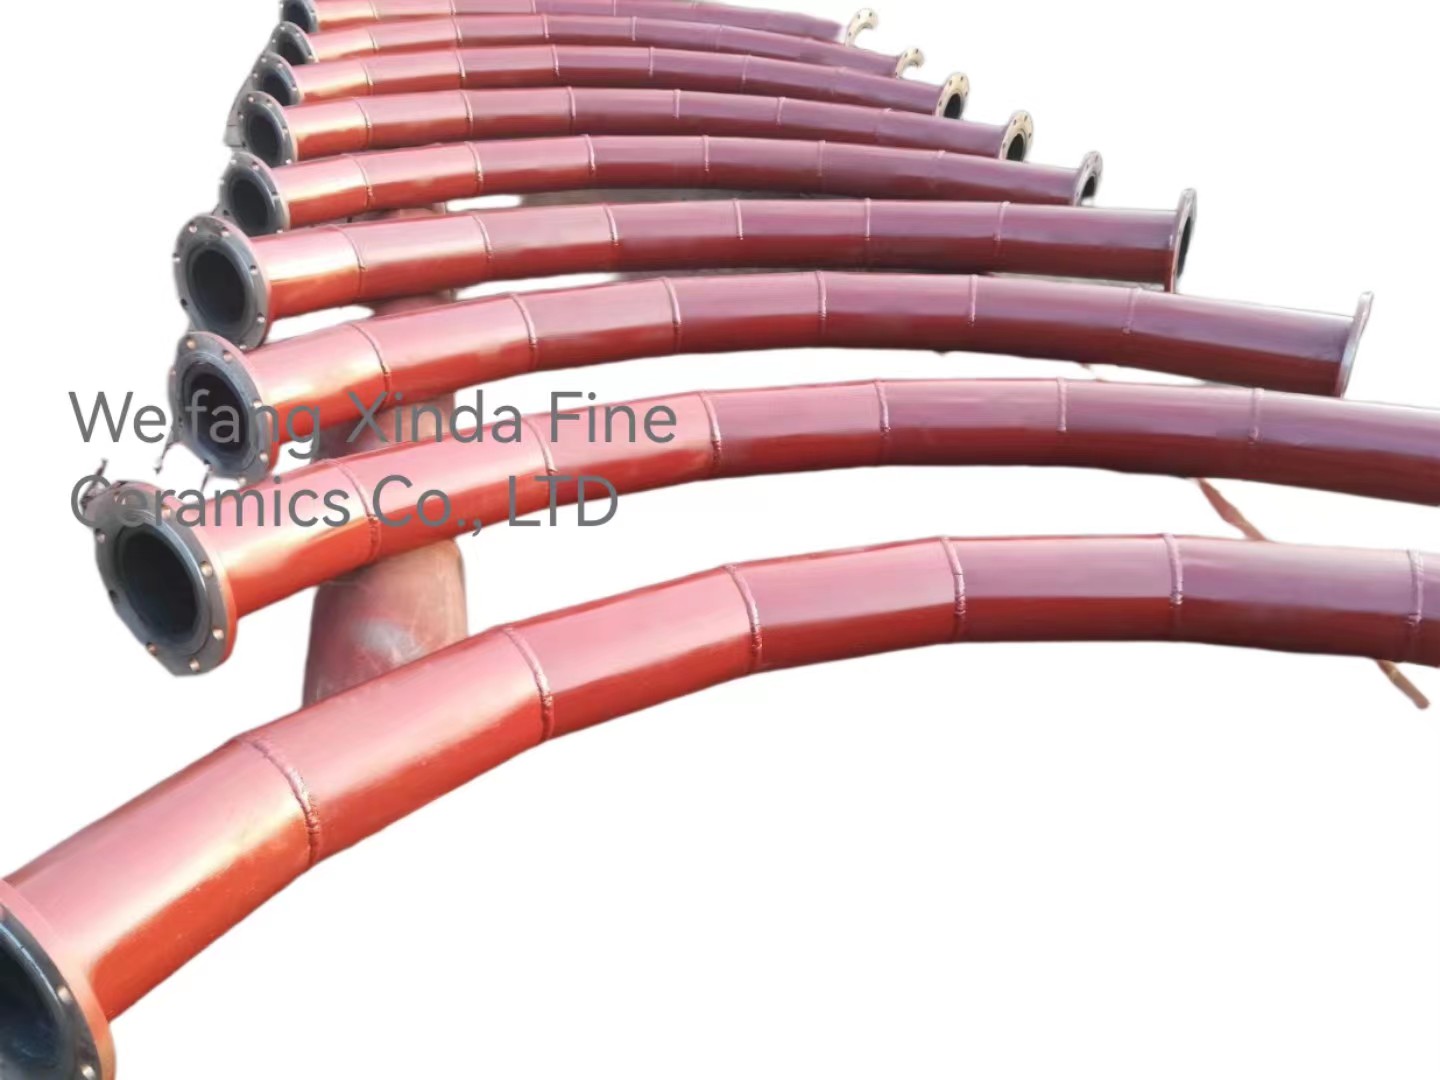 Silicon carbide lined wear resistant pipe